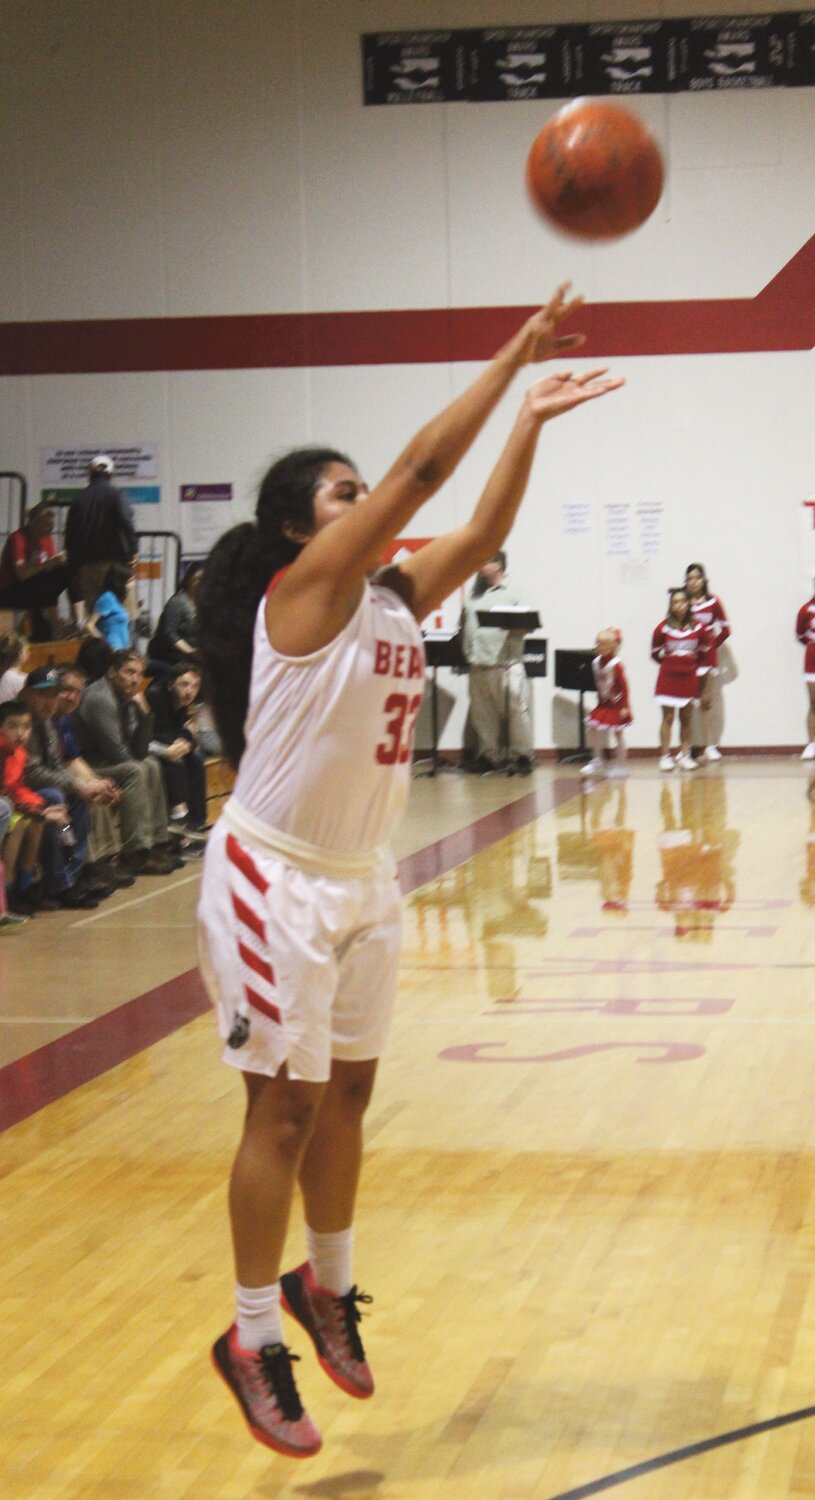 Yvette Sanchez, shown here shooting a three-pointer during a regular season game, led the Lady Bears against the Raiders with 12 points.